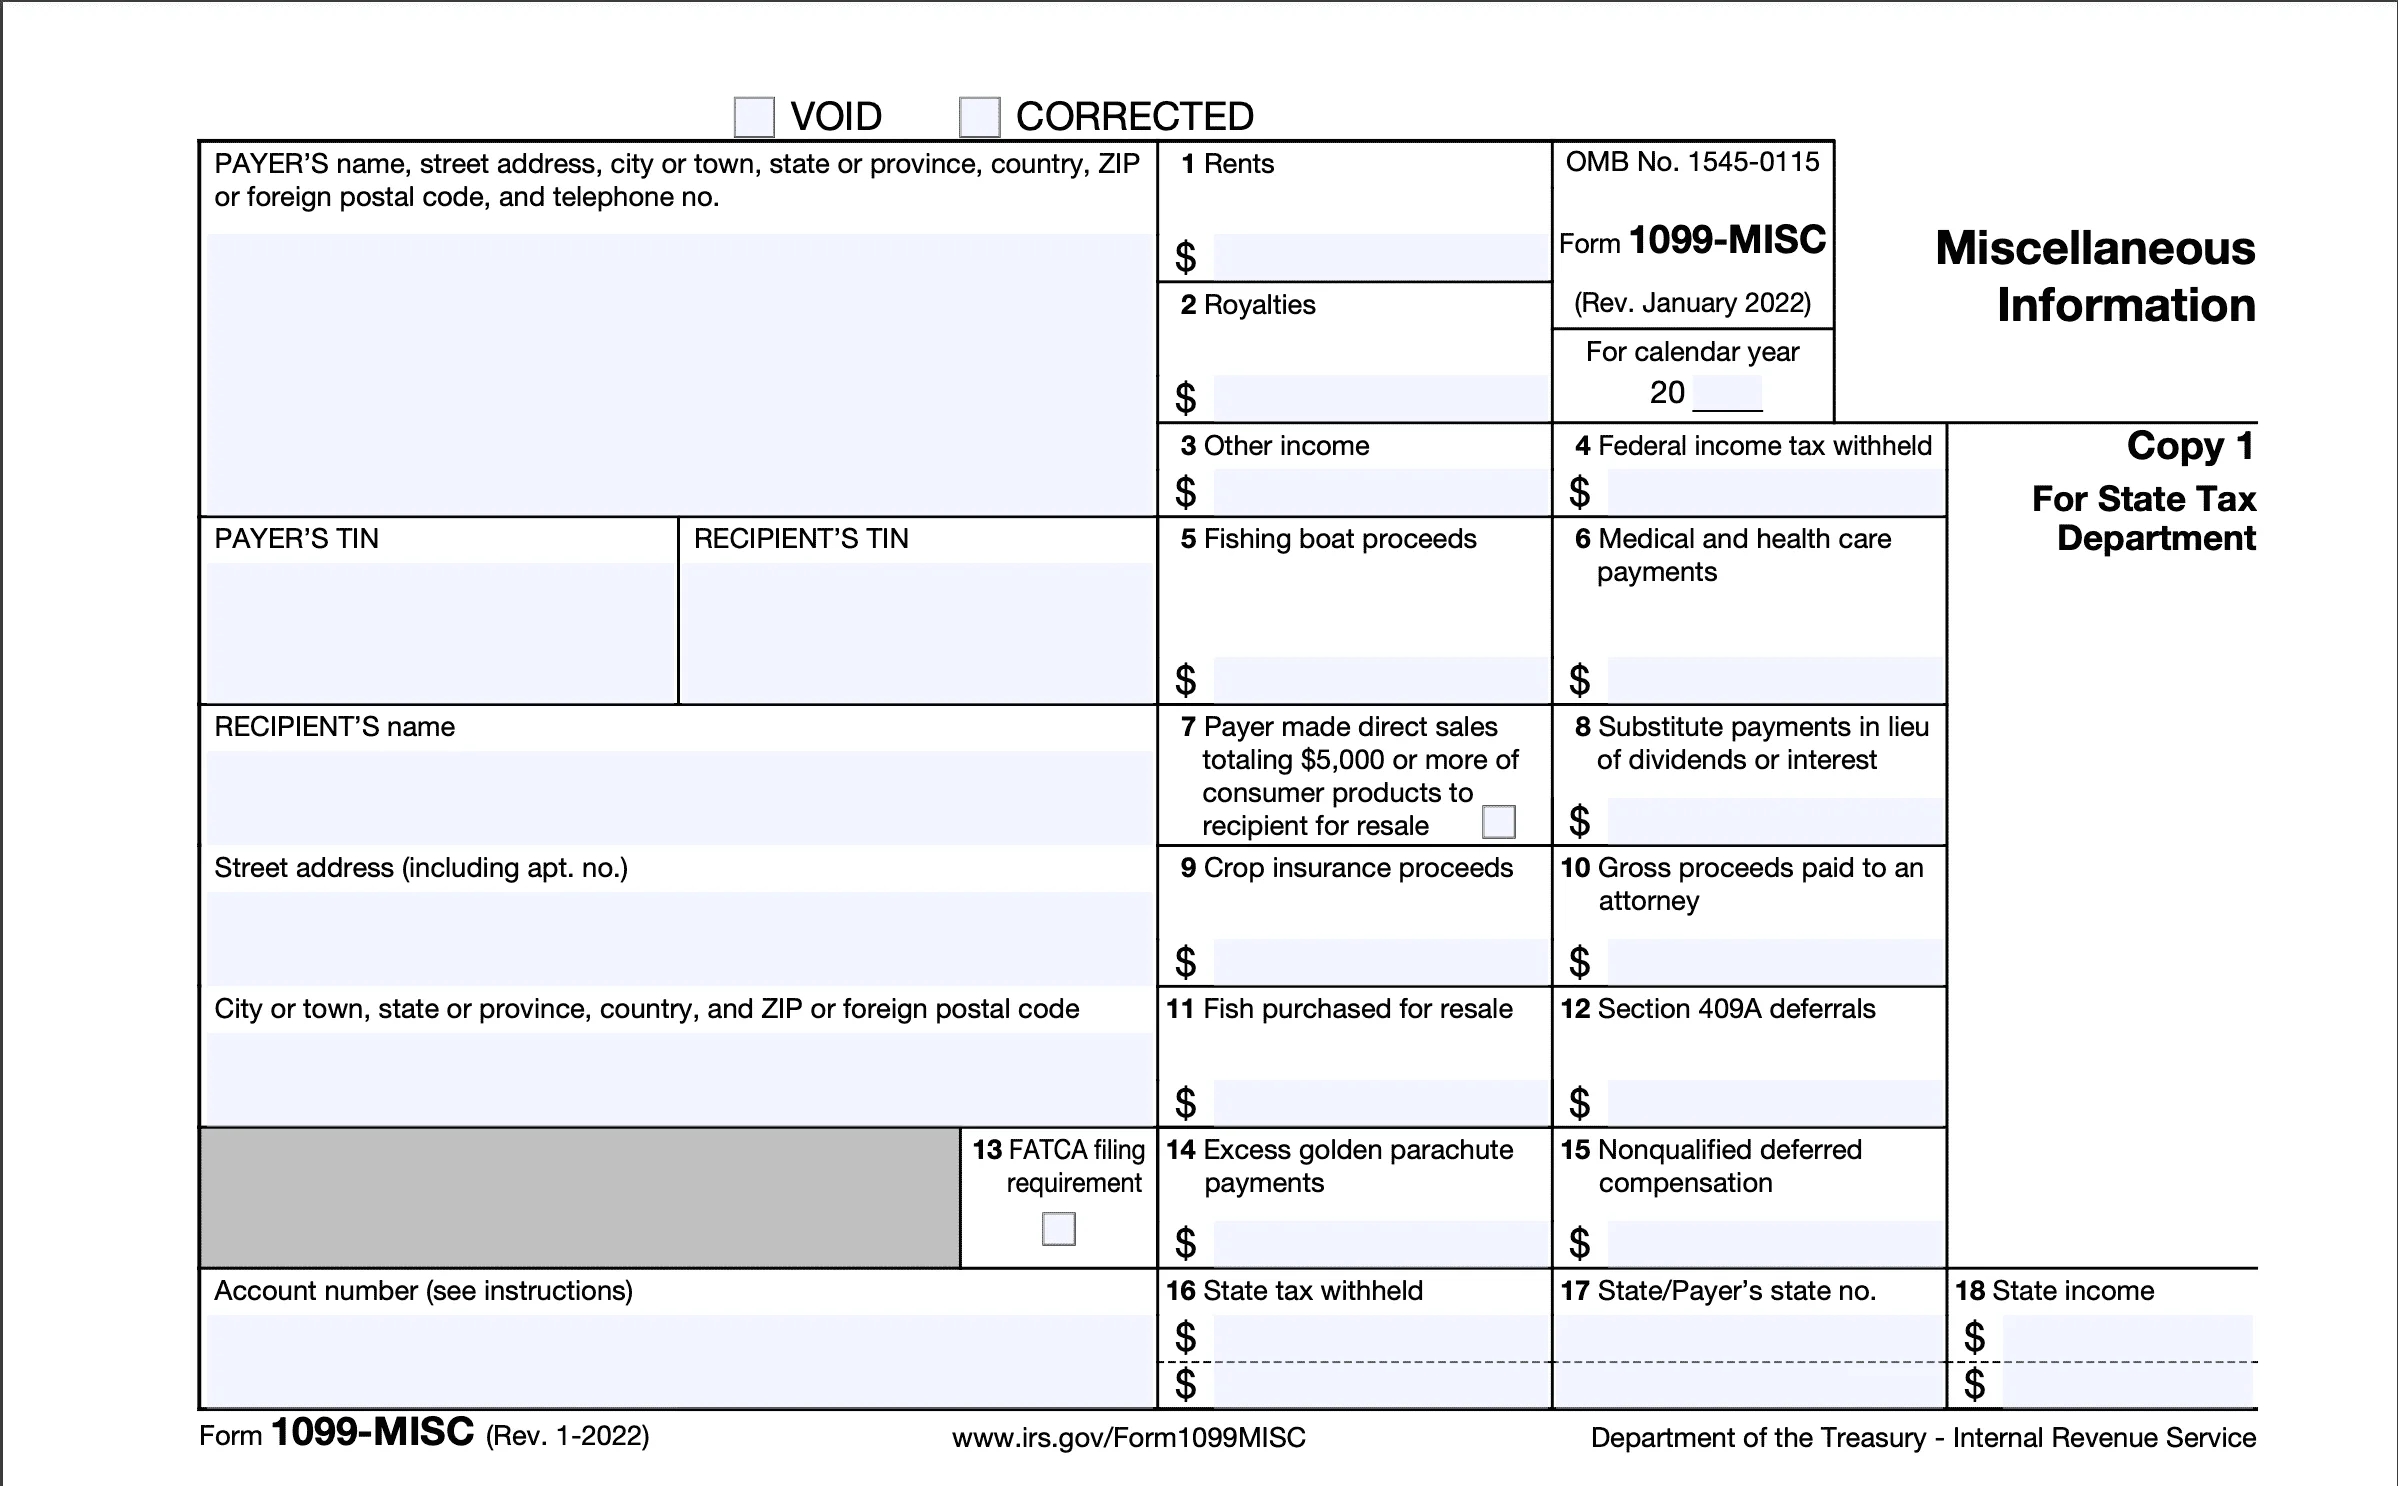 Image of Form 1099-MISC with fields for payer and recipient information, income types, tax withheld, and state tax information for self-employed individuals, freelancers, and those paying taxes.